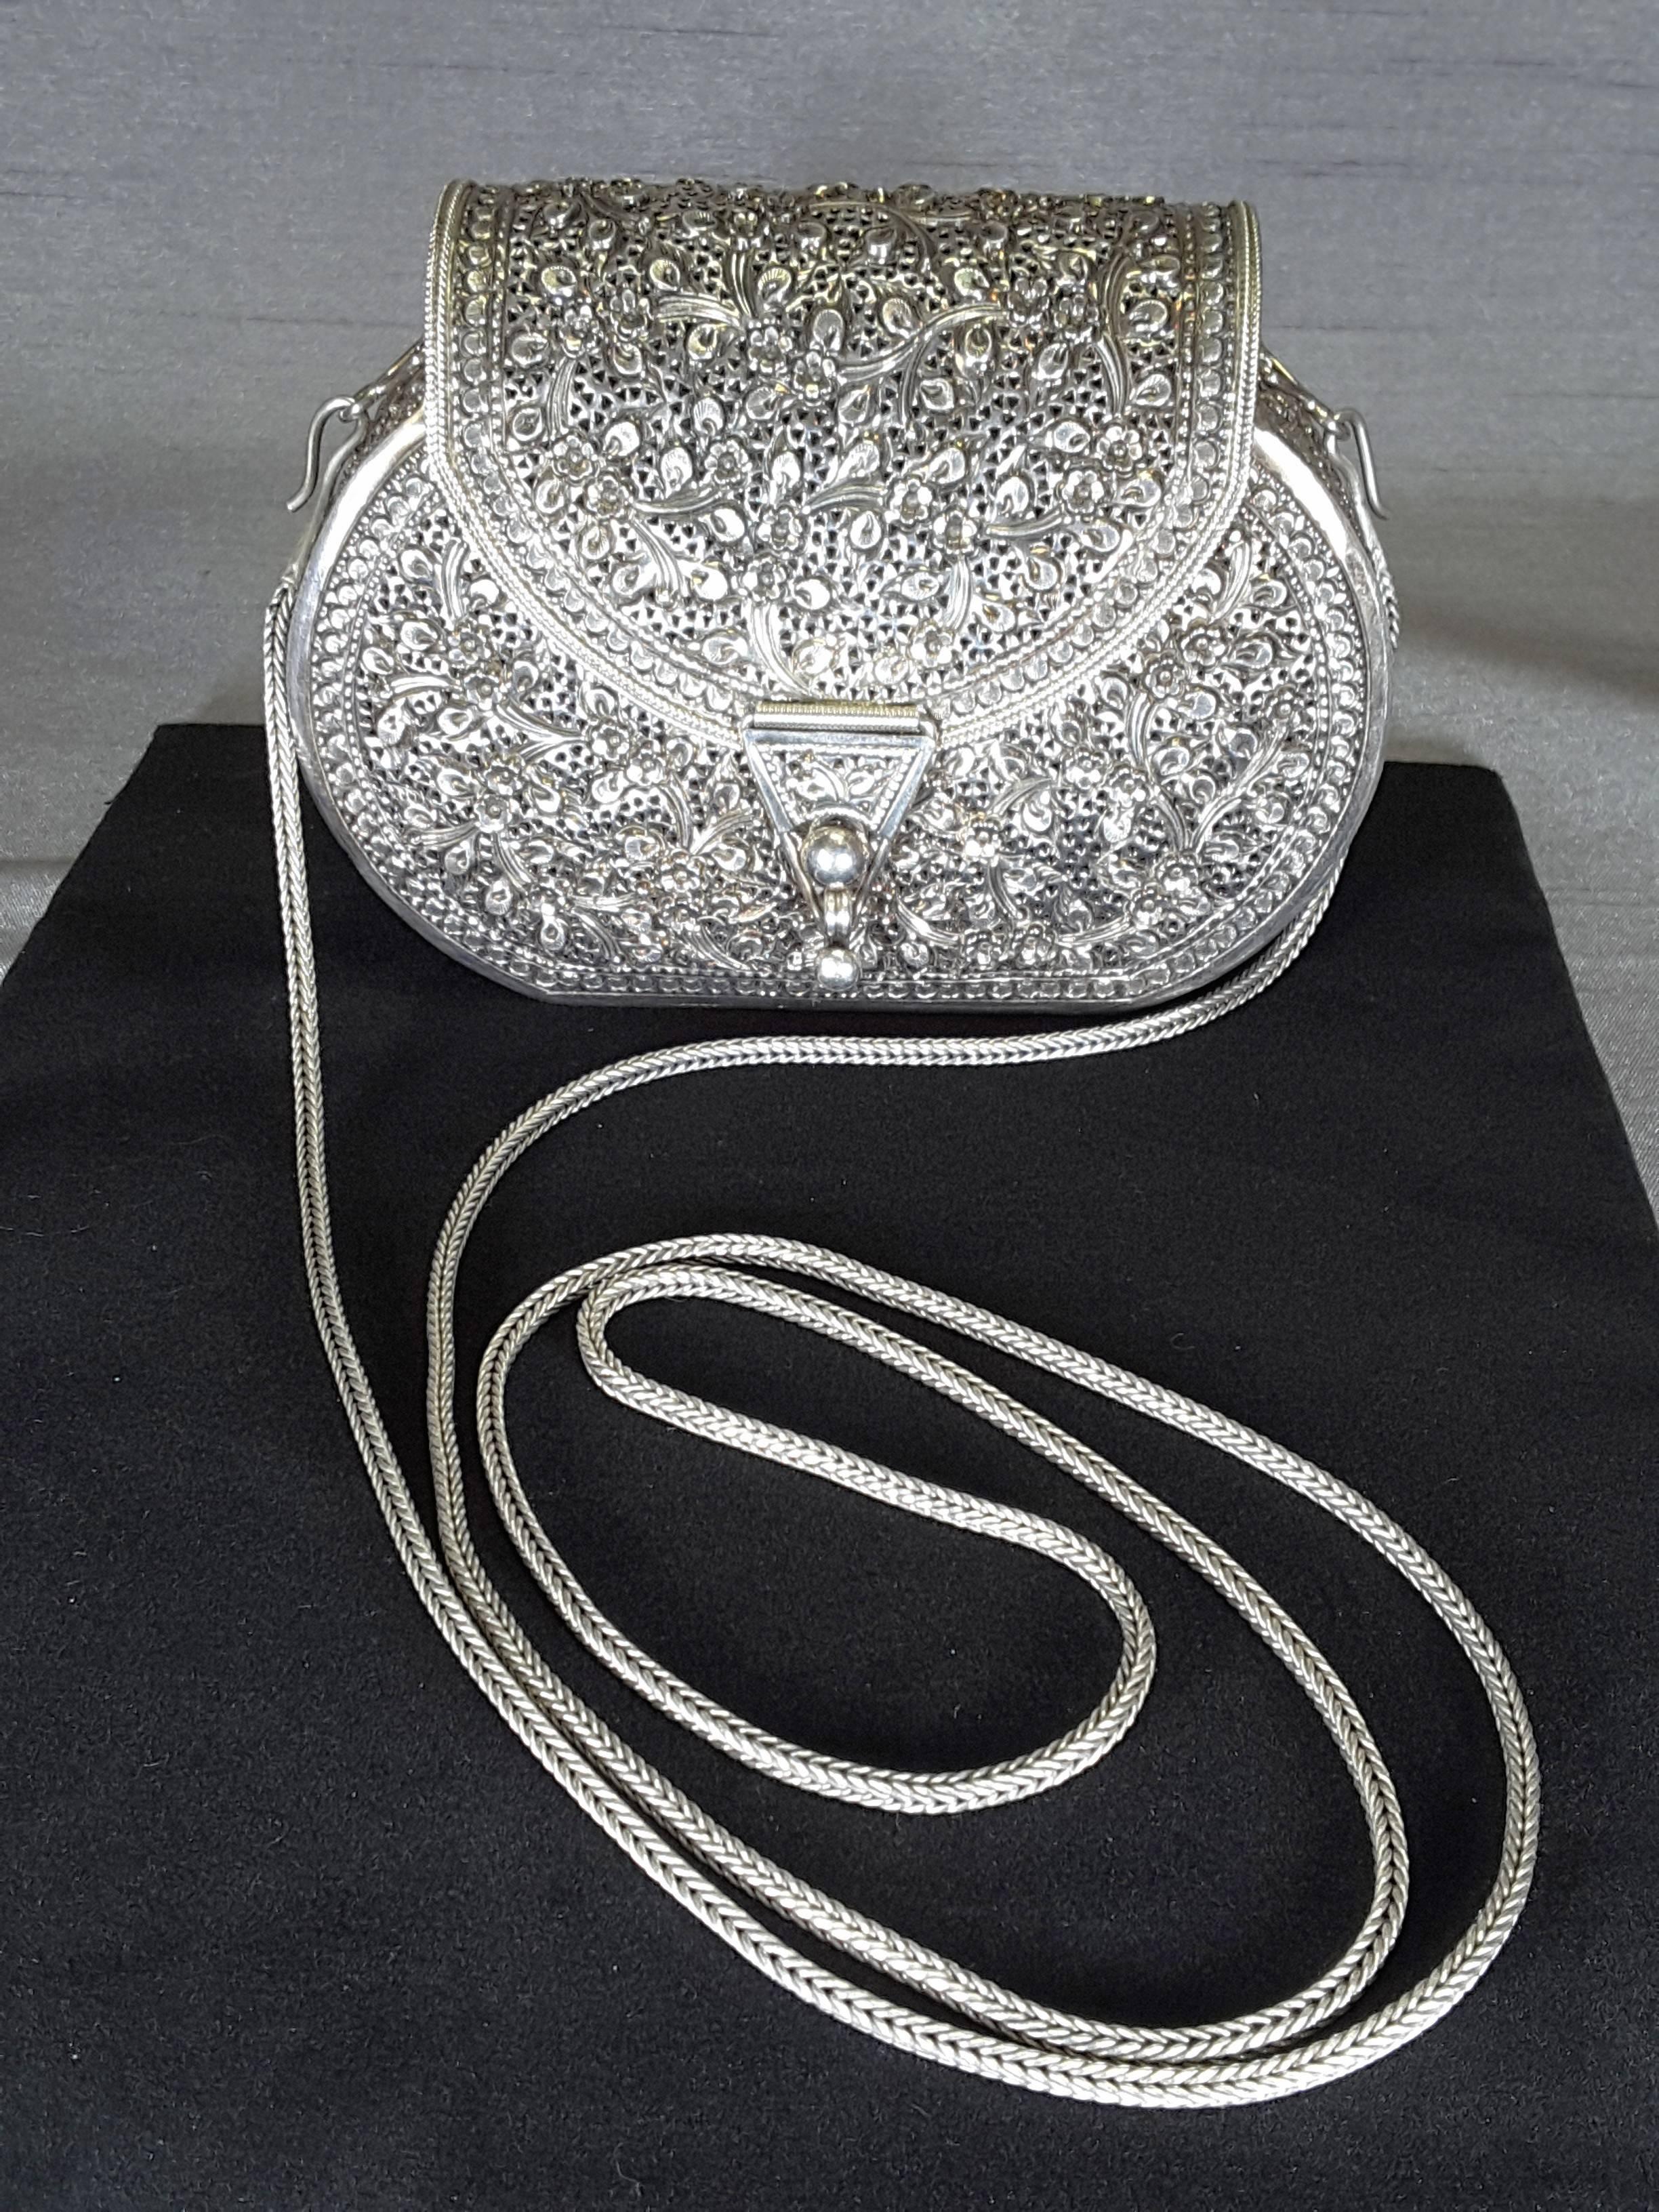 Sterling silver floral decorated evening purse with long braided silver chain, made entirely of silver with a rounded fold over top and closure. The purse is stamped .925 on the front under the top. The rounded purse/evening bag/clutch purse is